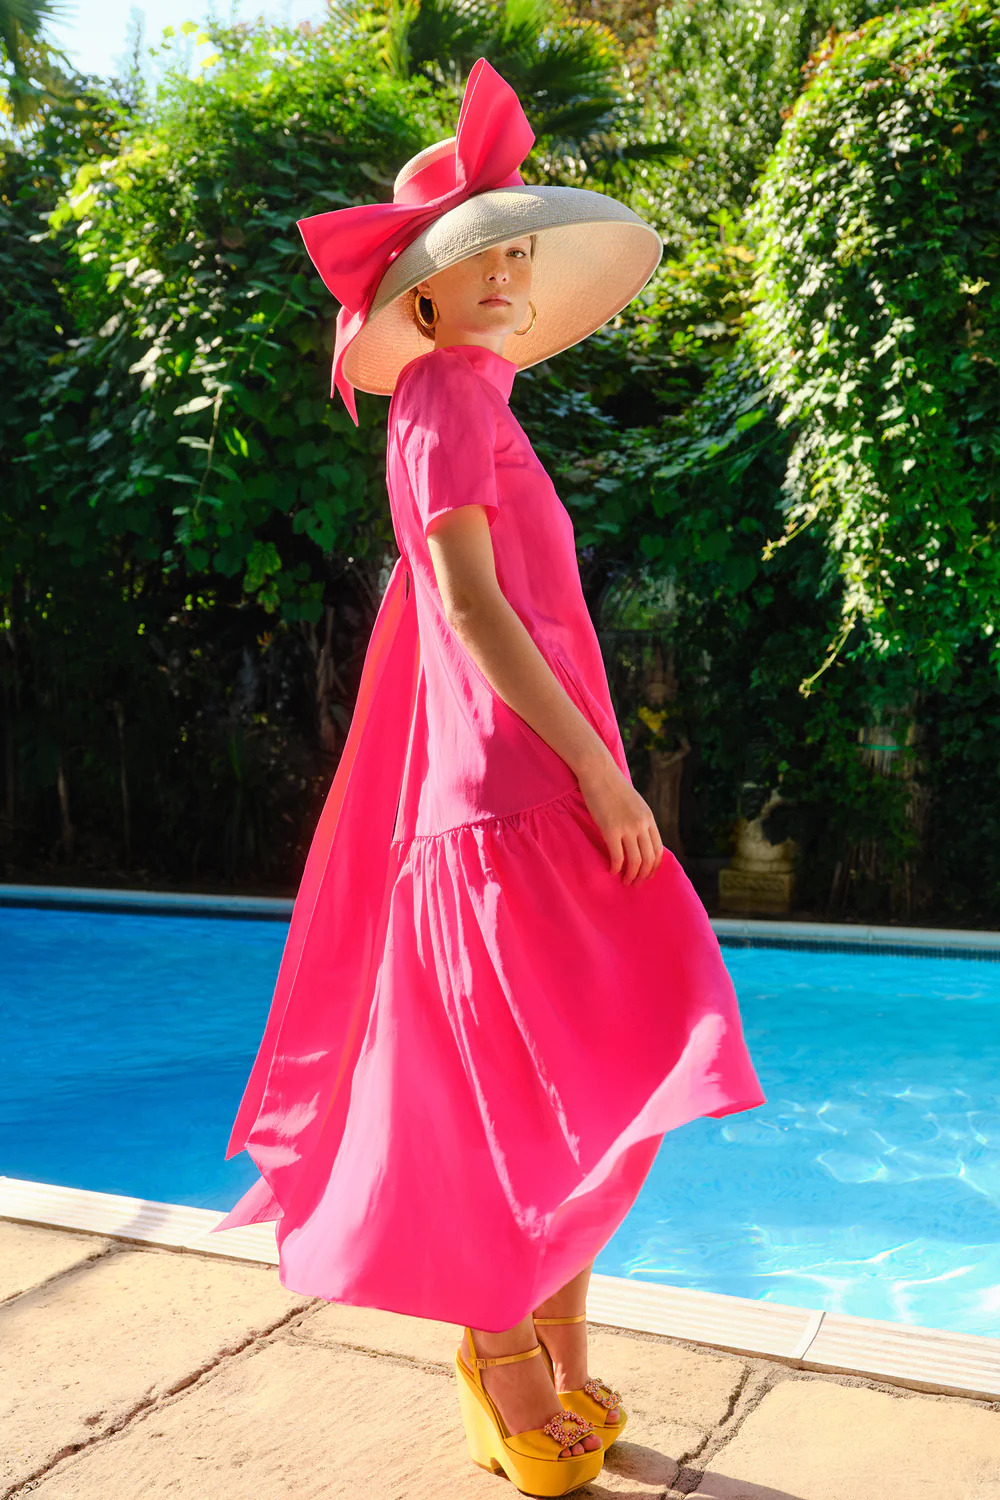 Woman in pink dress and straw hat by pool